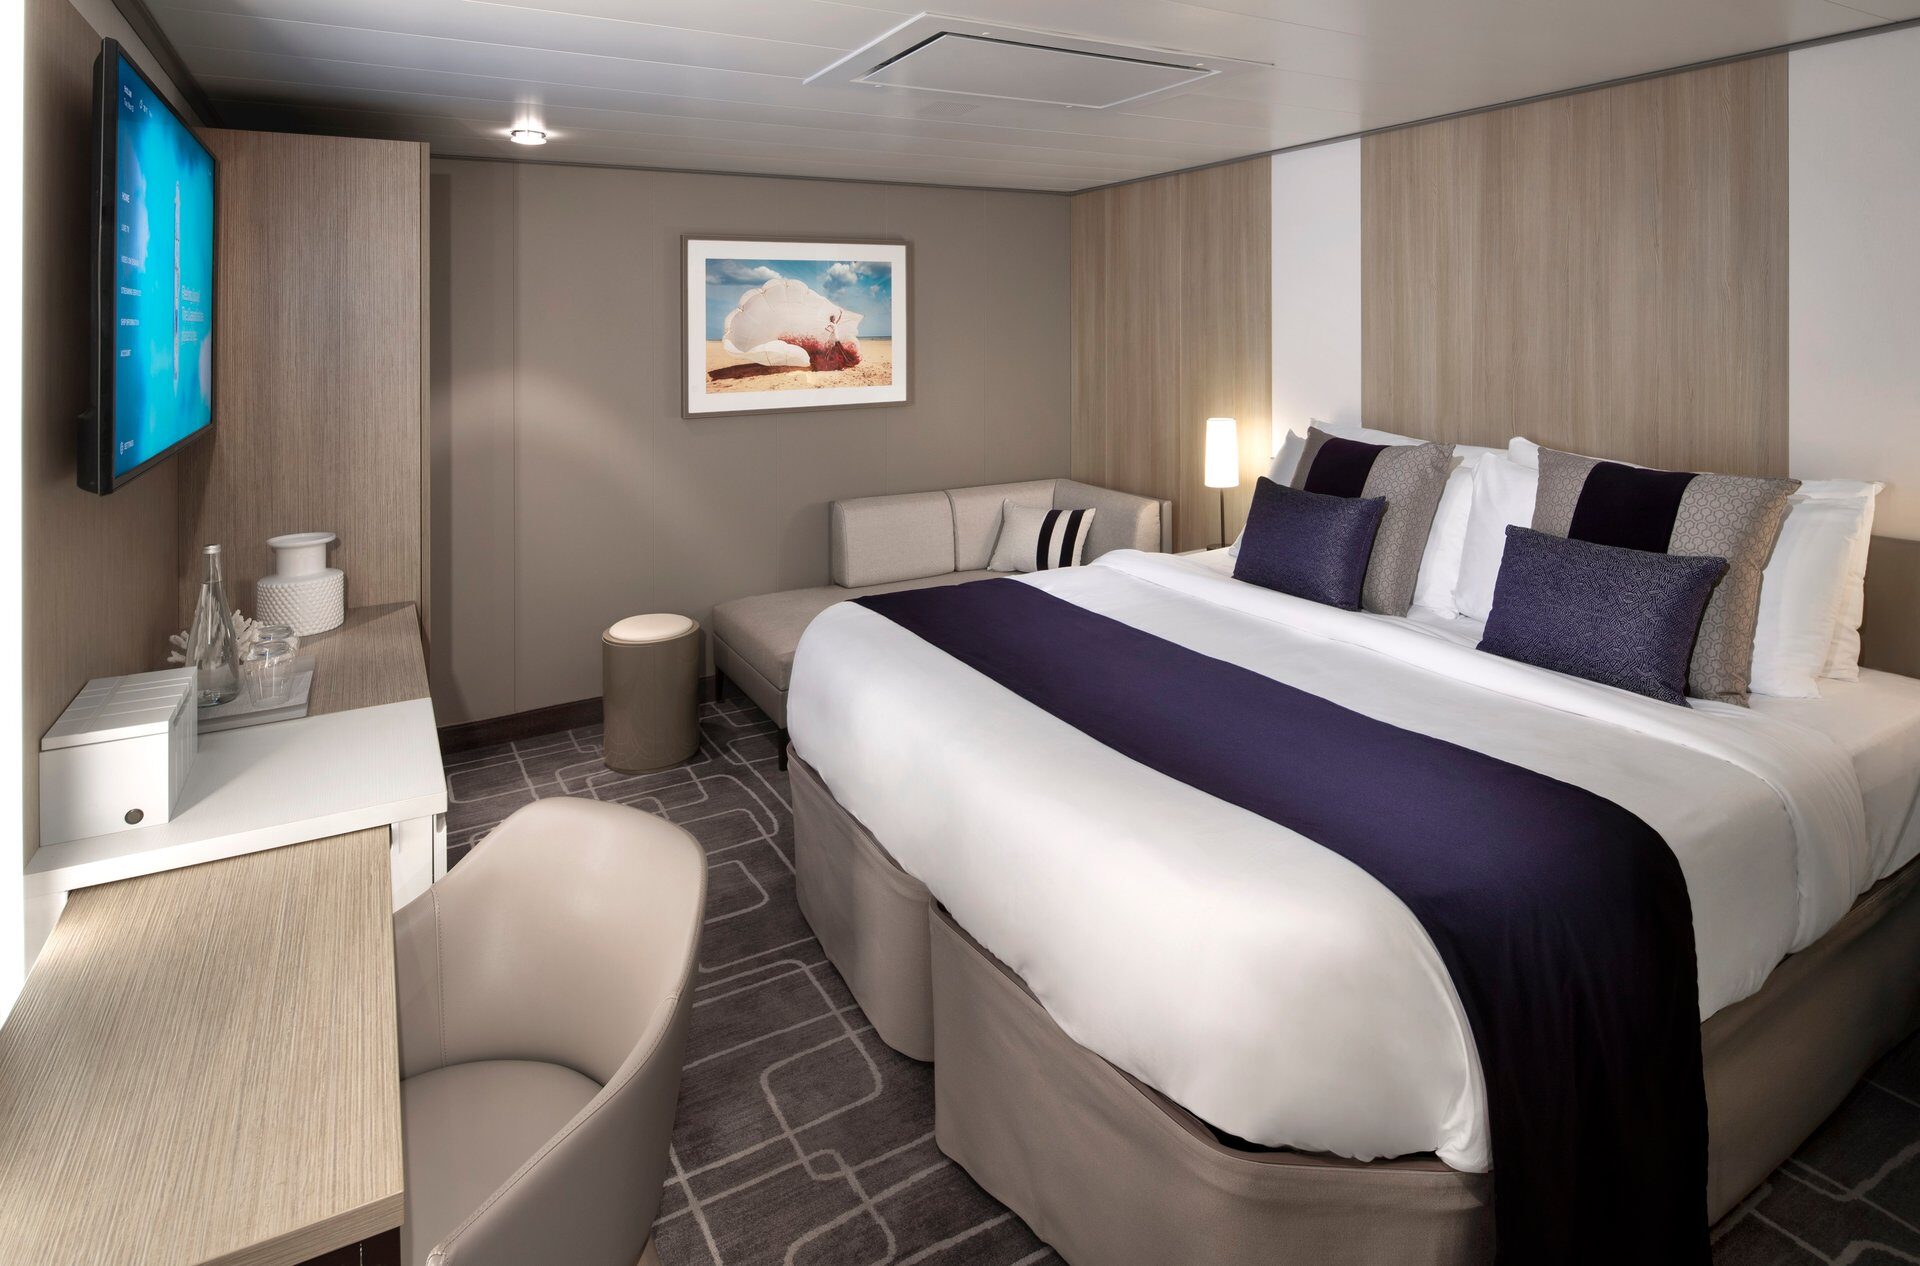 How To Choose The Best Stateroom On A Cruise | Celebrity Cruises